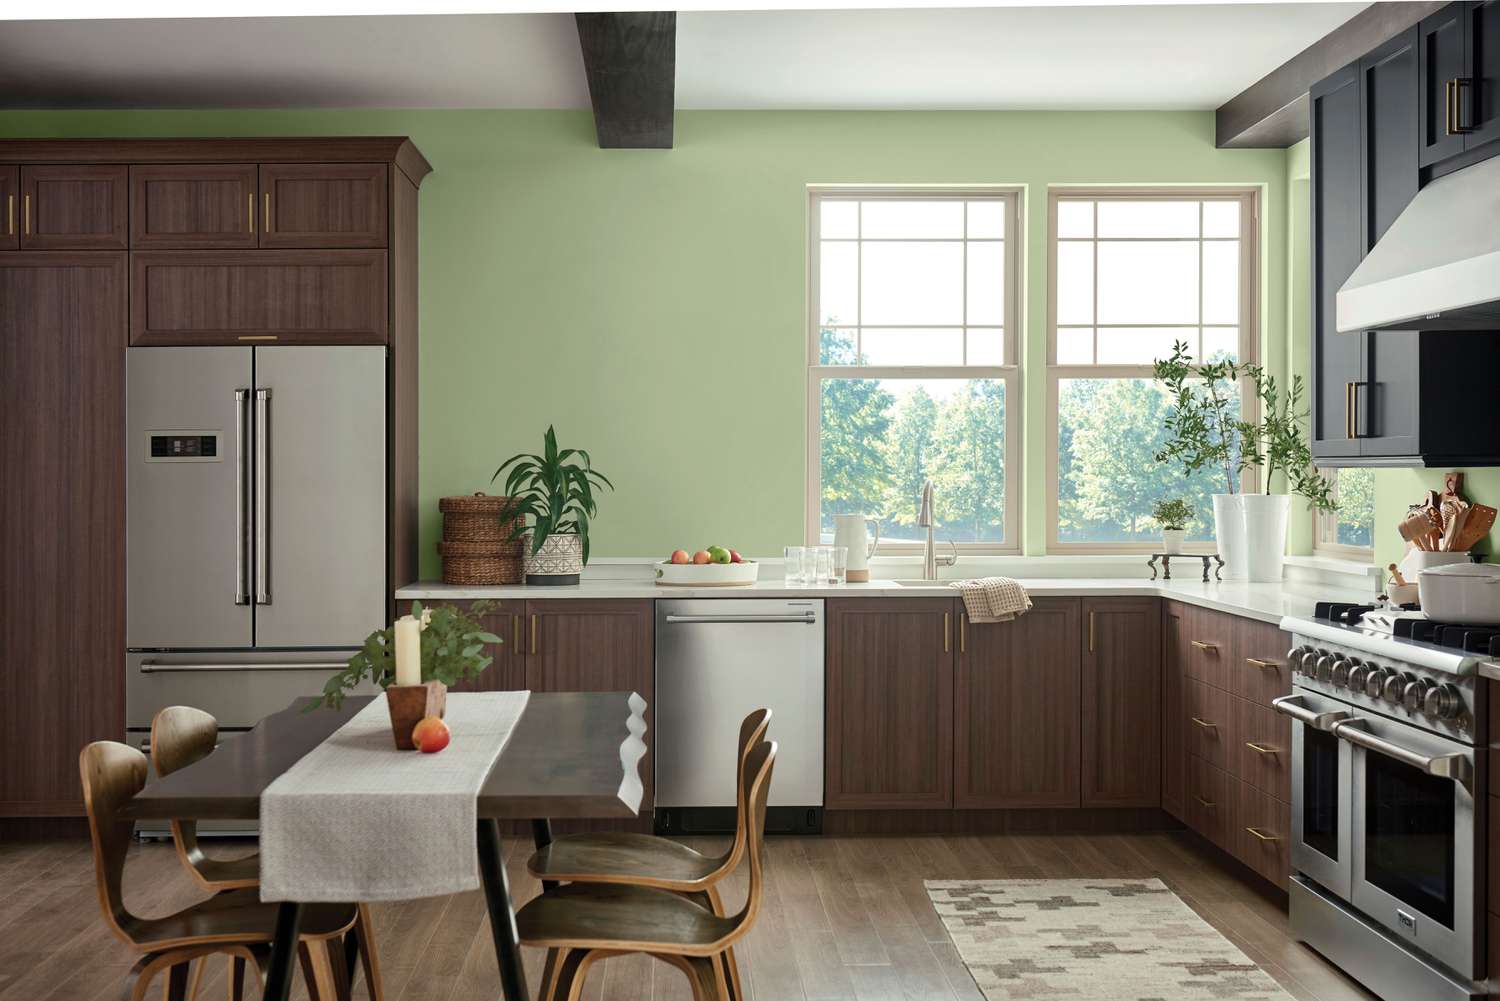 Color trend predictions 2022 - Olive Sprig paint by PPG in kitchen